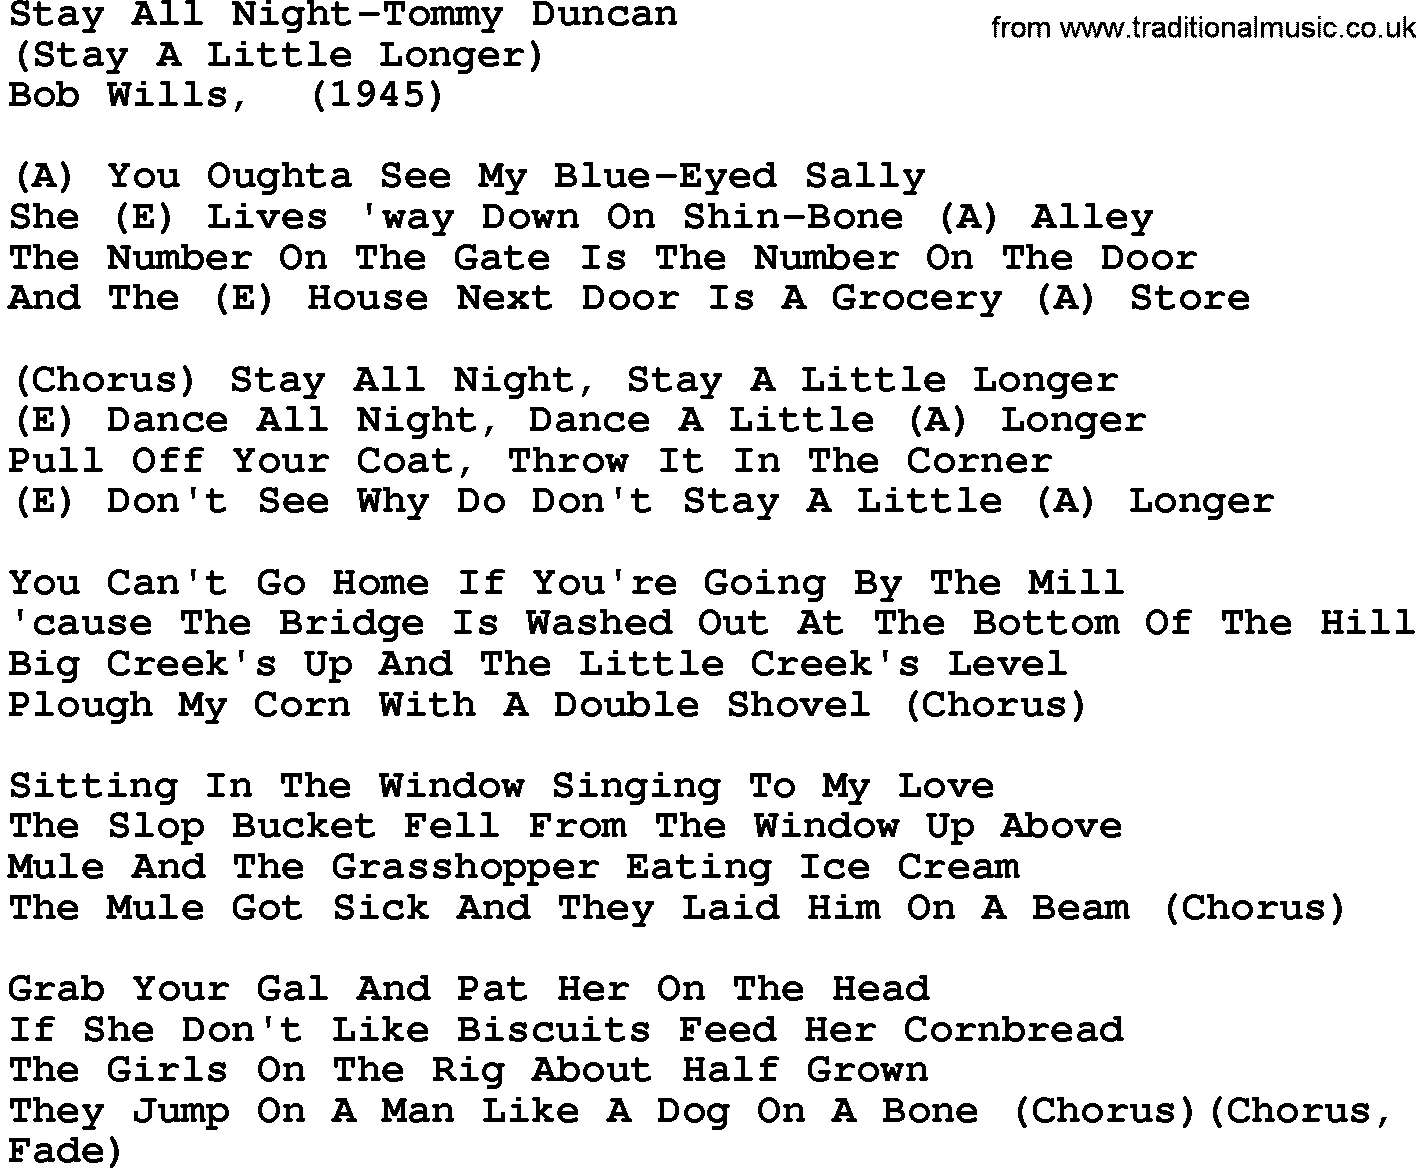 Country music song: Stay All Night-Tommy Duncan lyrics and chords